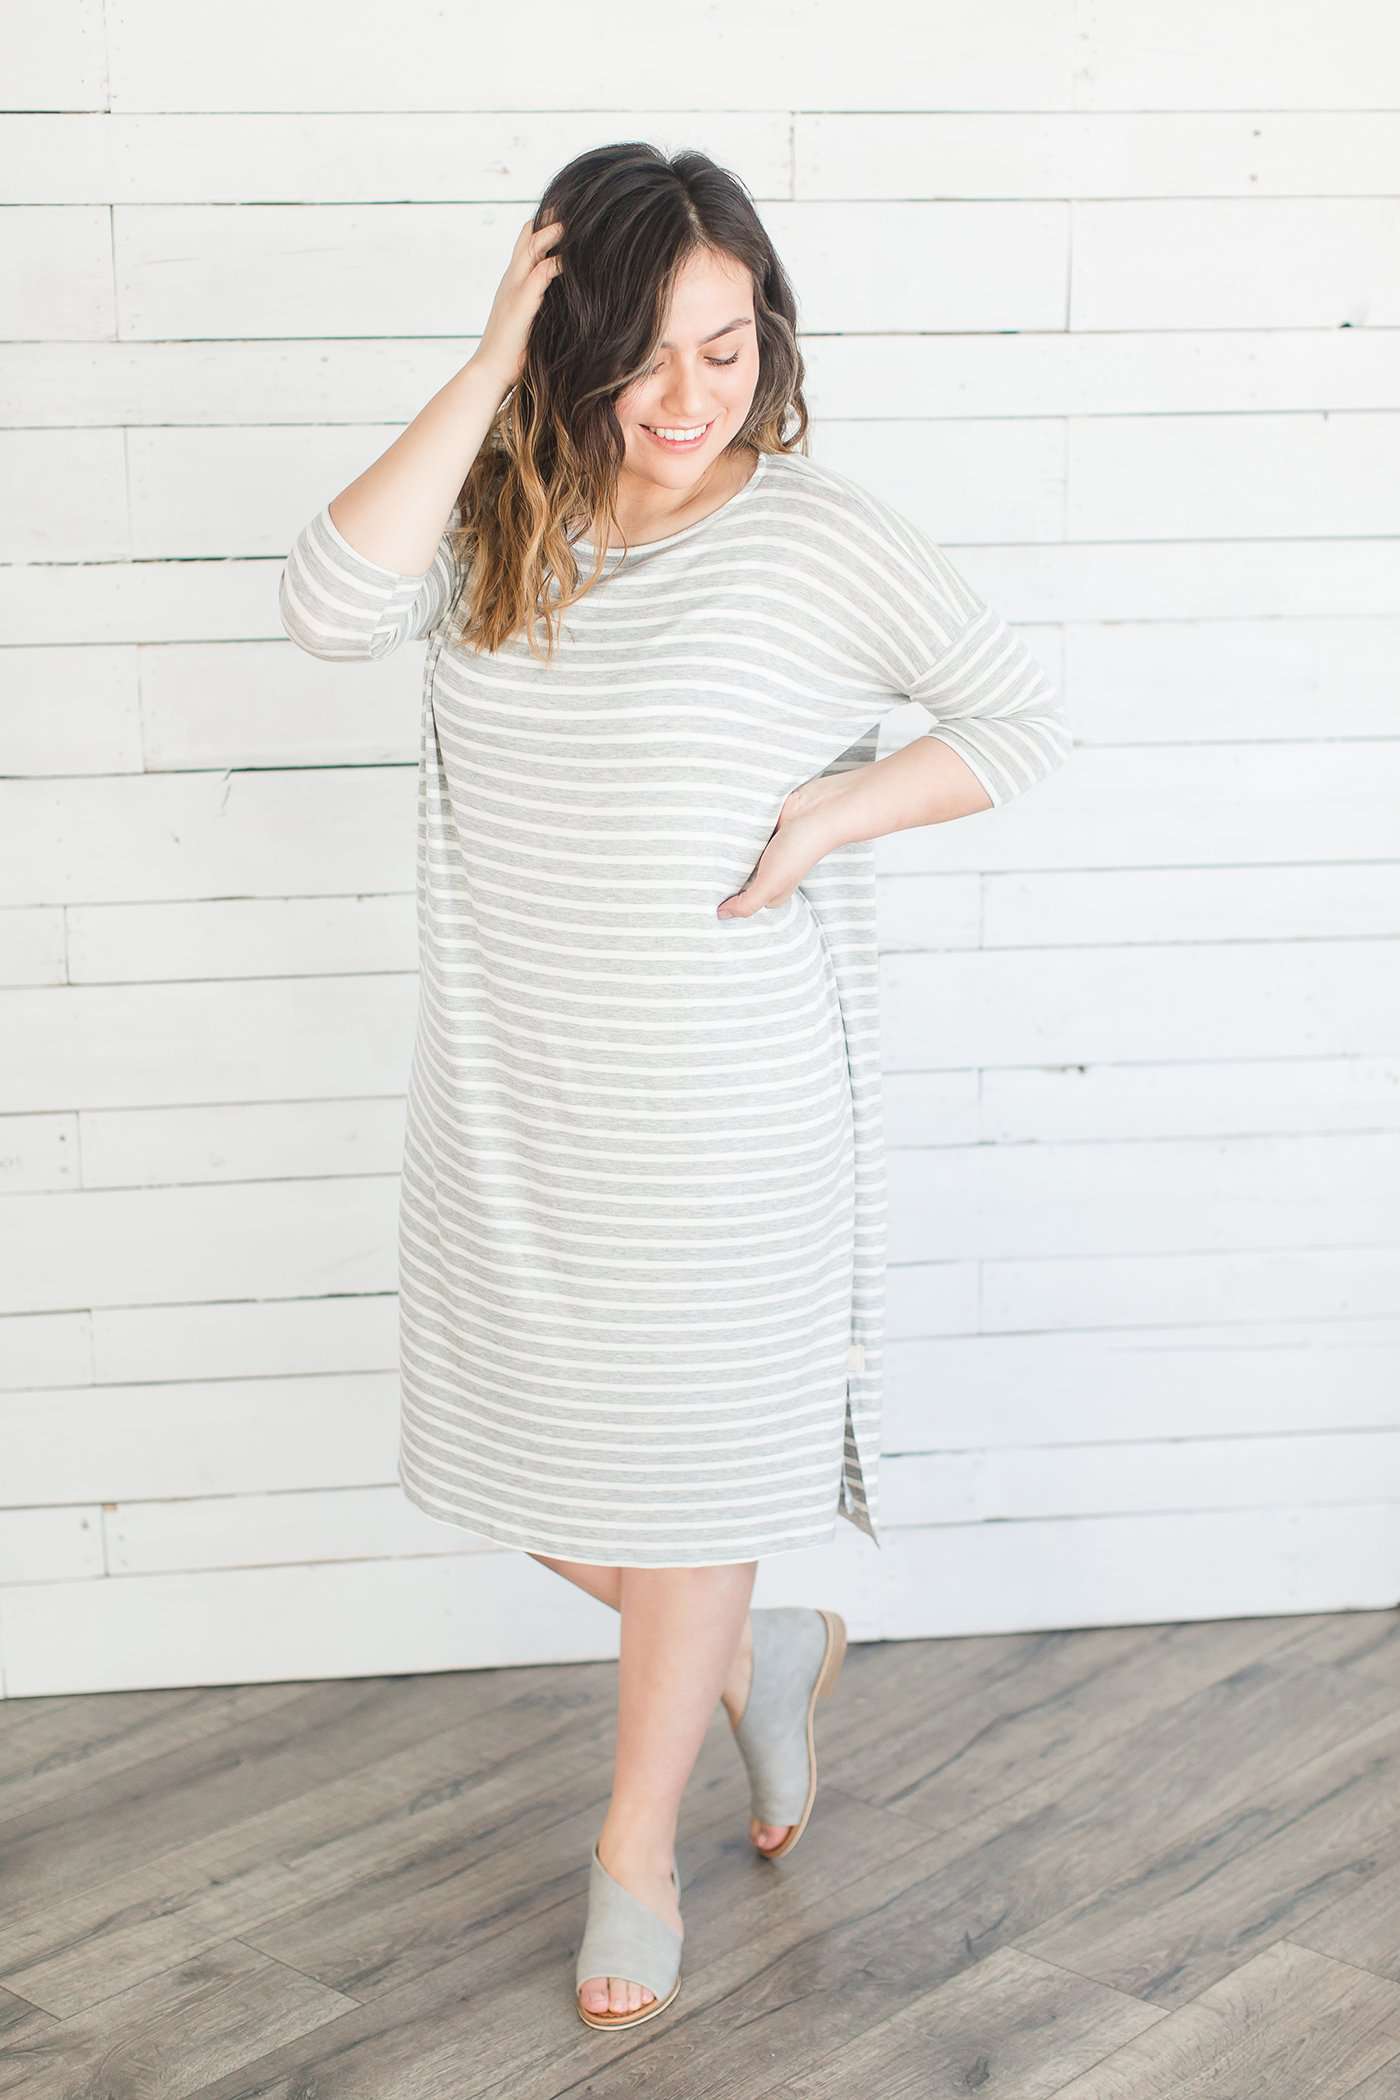 grey and white striped three quarter length sleeve midi dress with a modest crew neck top and side slit.